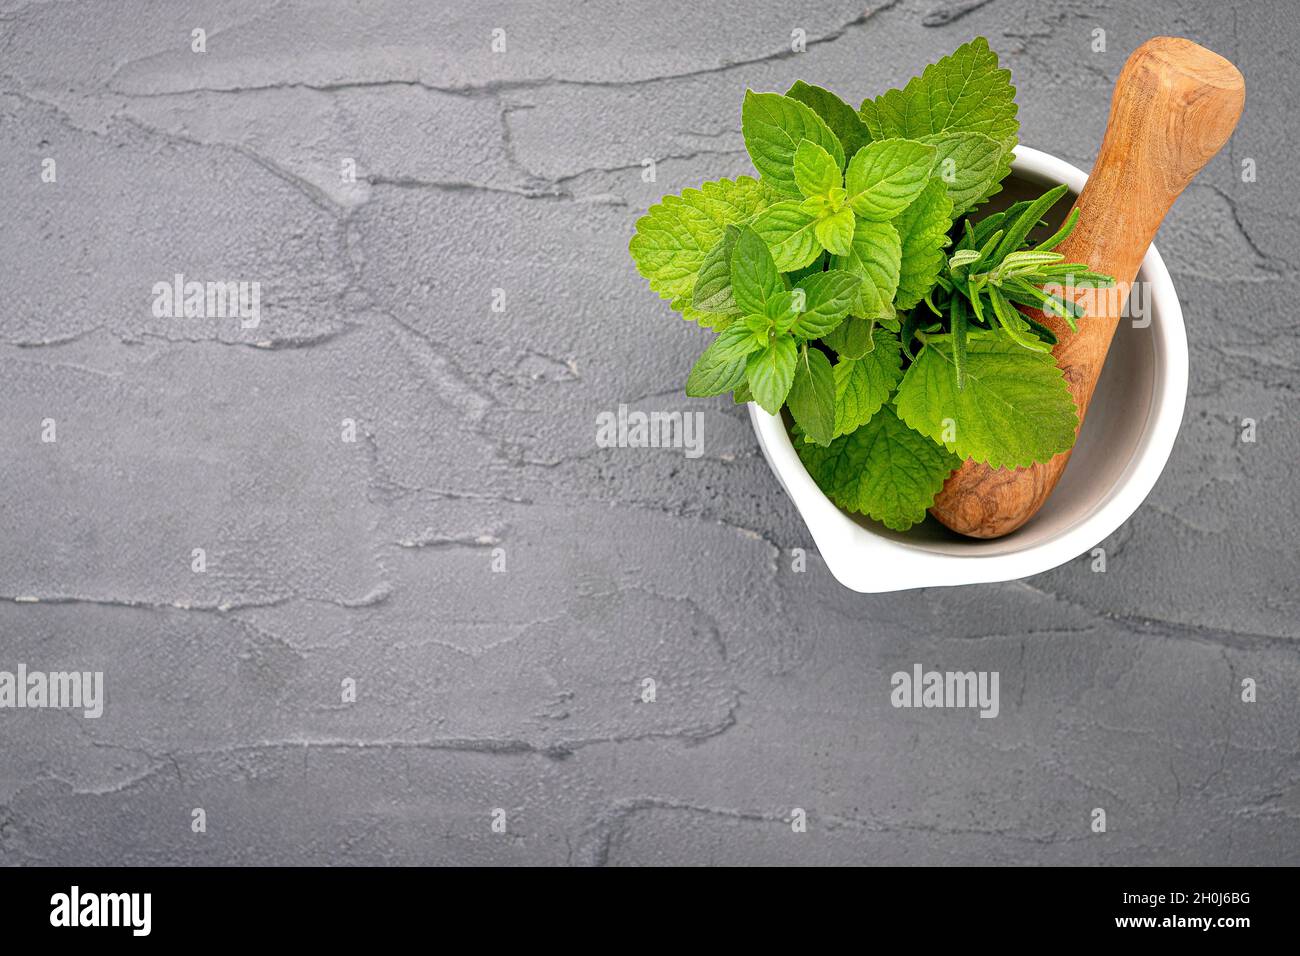 Alternative medicine fresh herbs in the stone mortar . Food ingredients and seasoning  peppermint , rosemarry and lemon balm  in a stone mortar set up Stock Photo